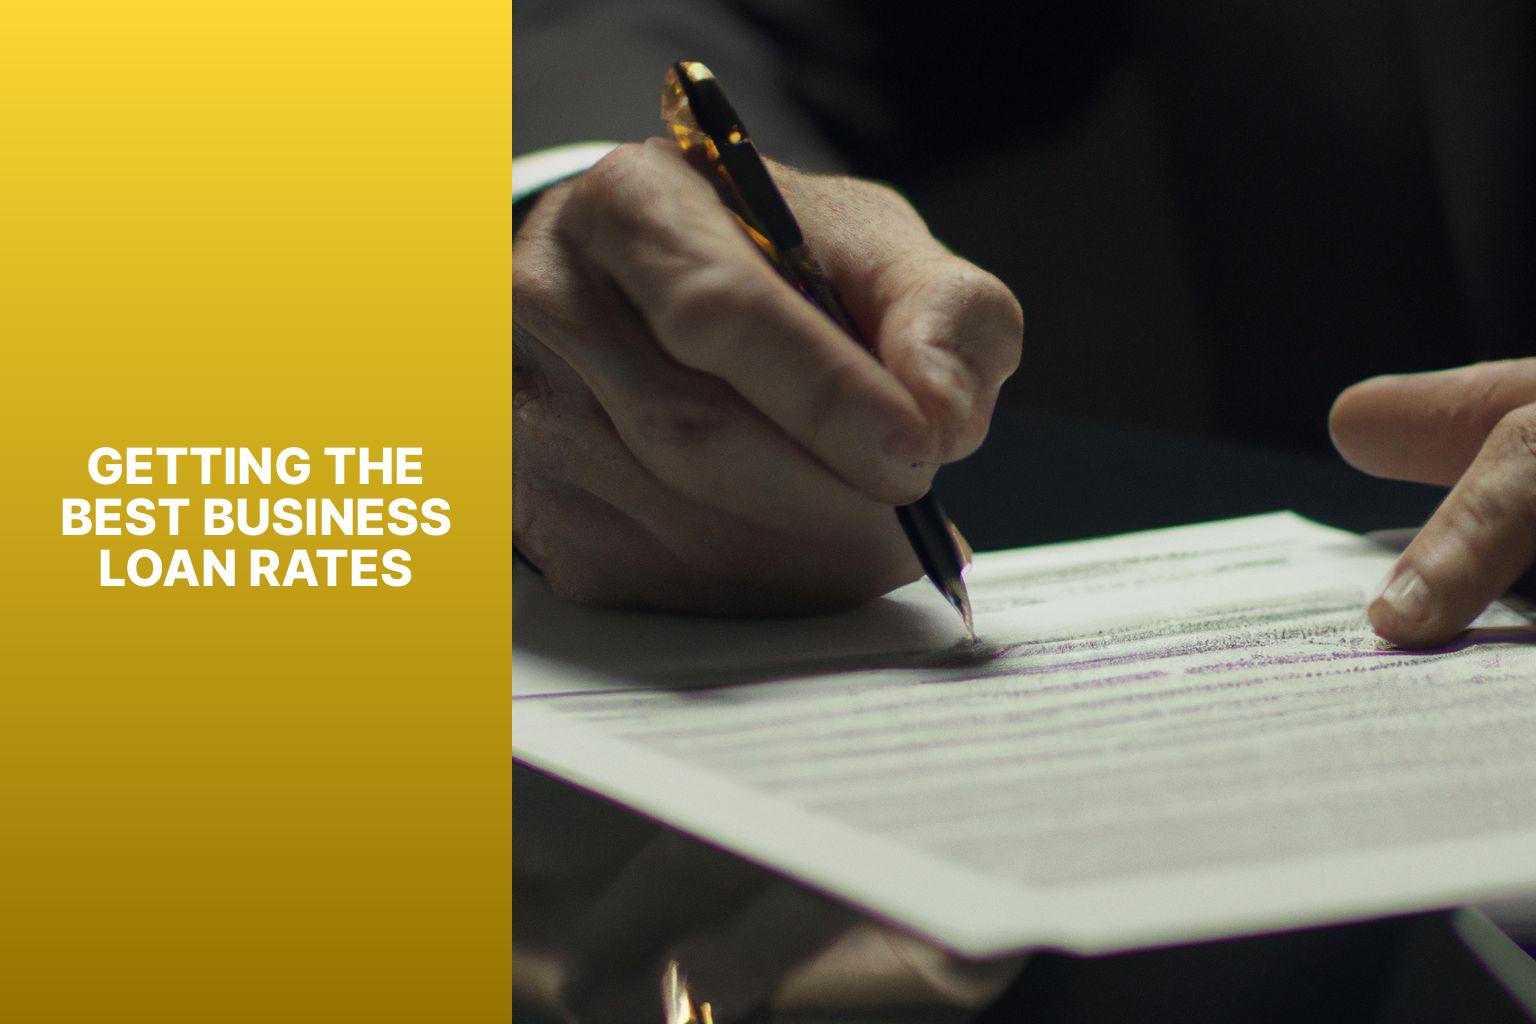 Getting the Best Business Loan Rates - The Great Rate Debate: An Analysis of Business Loan Rates 